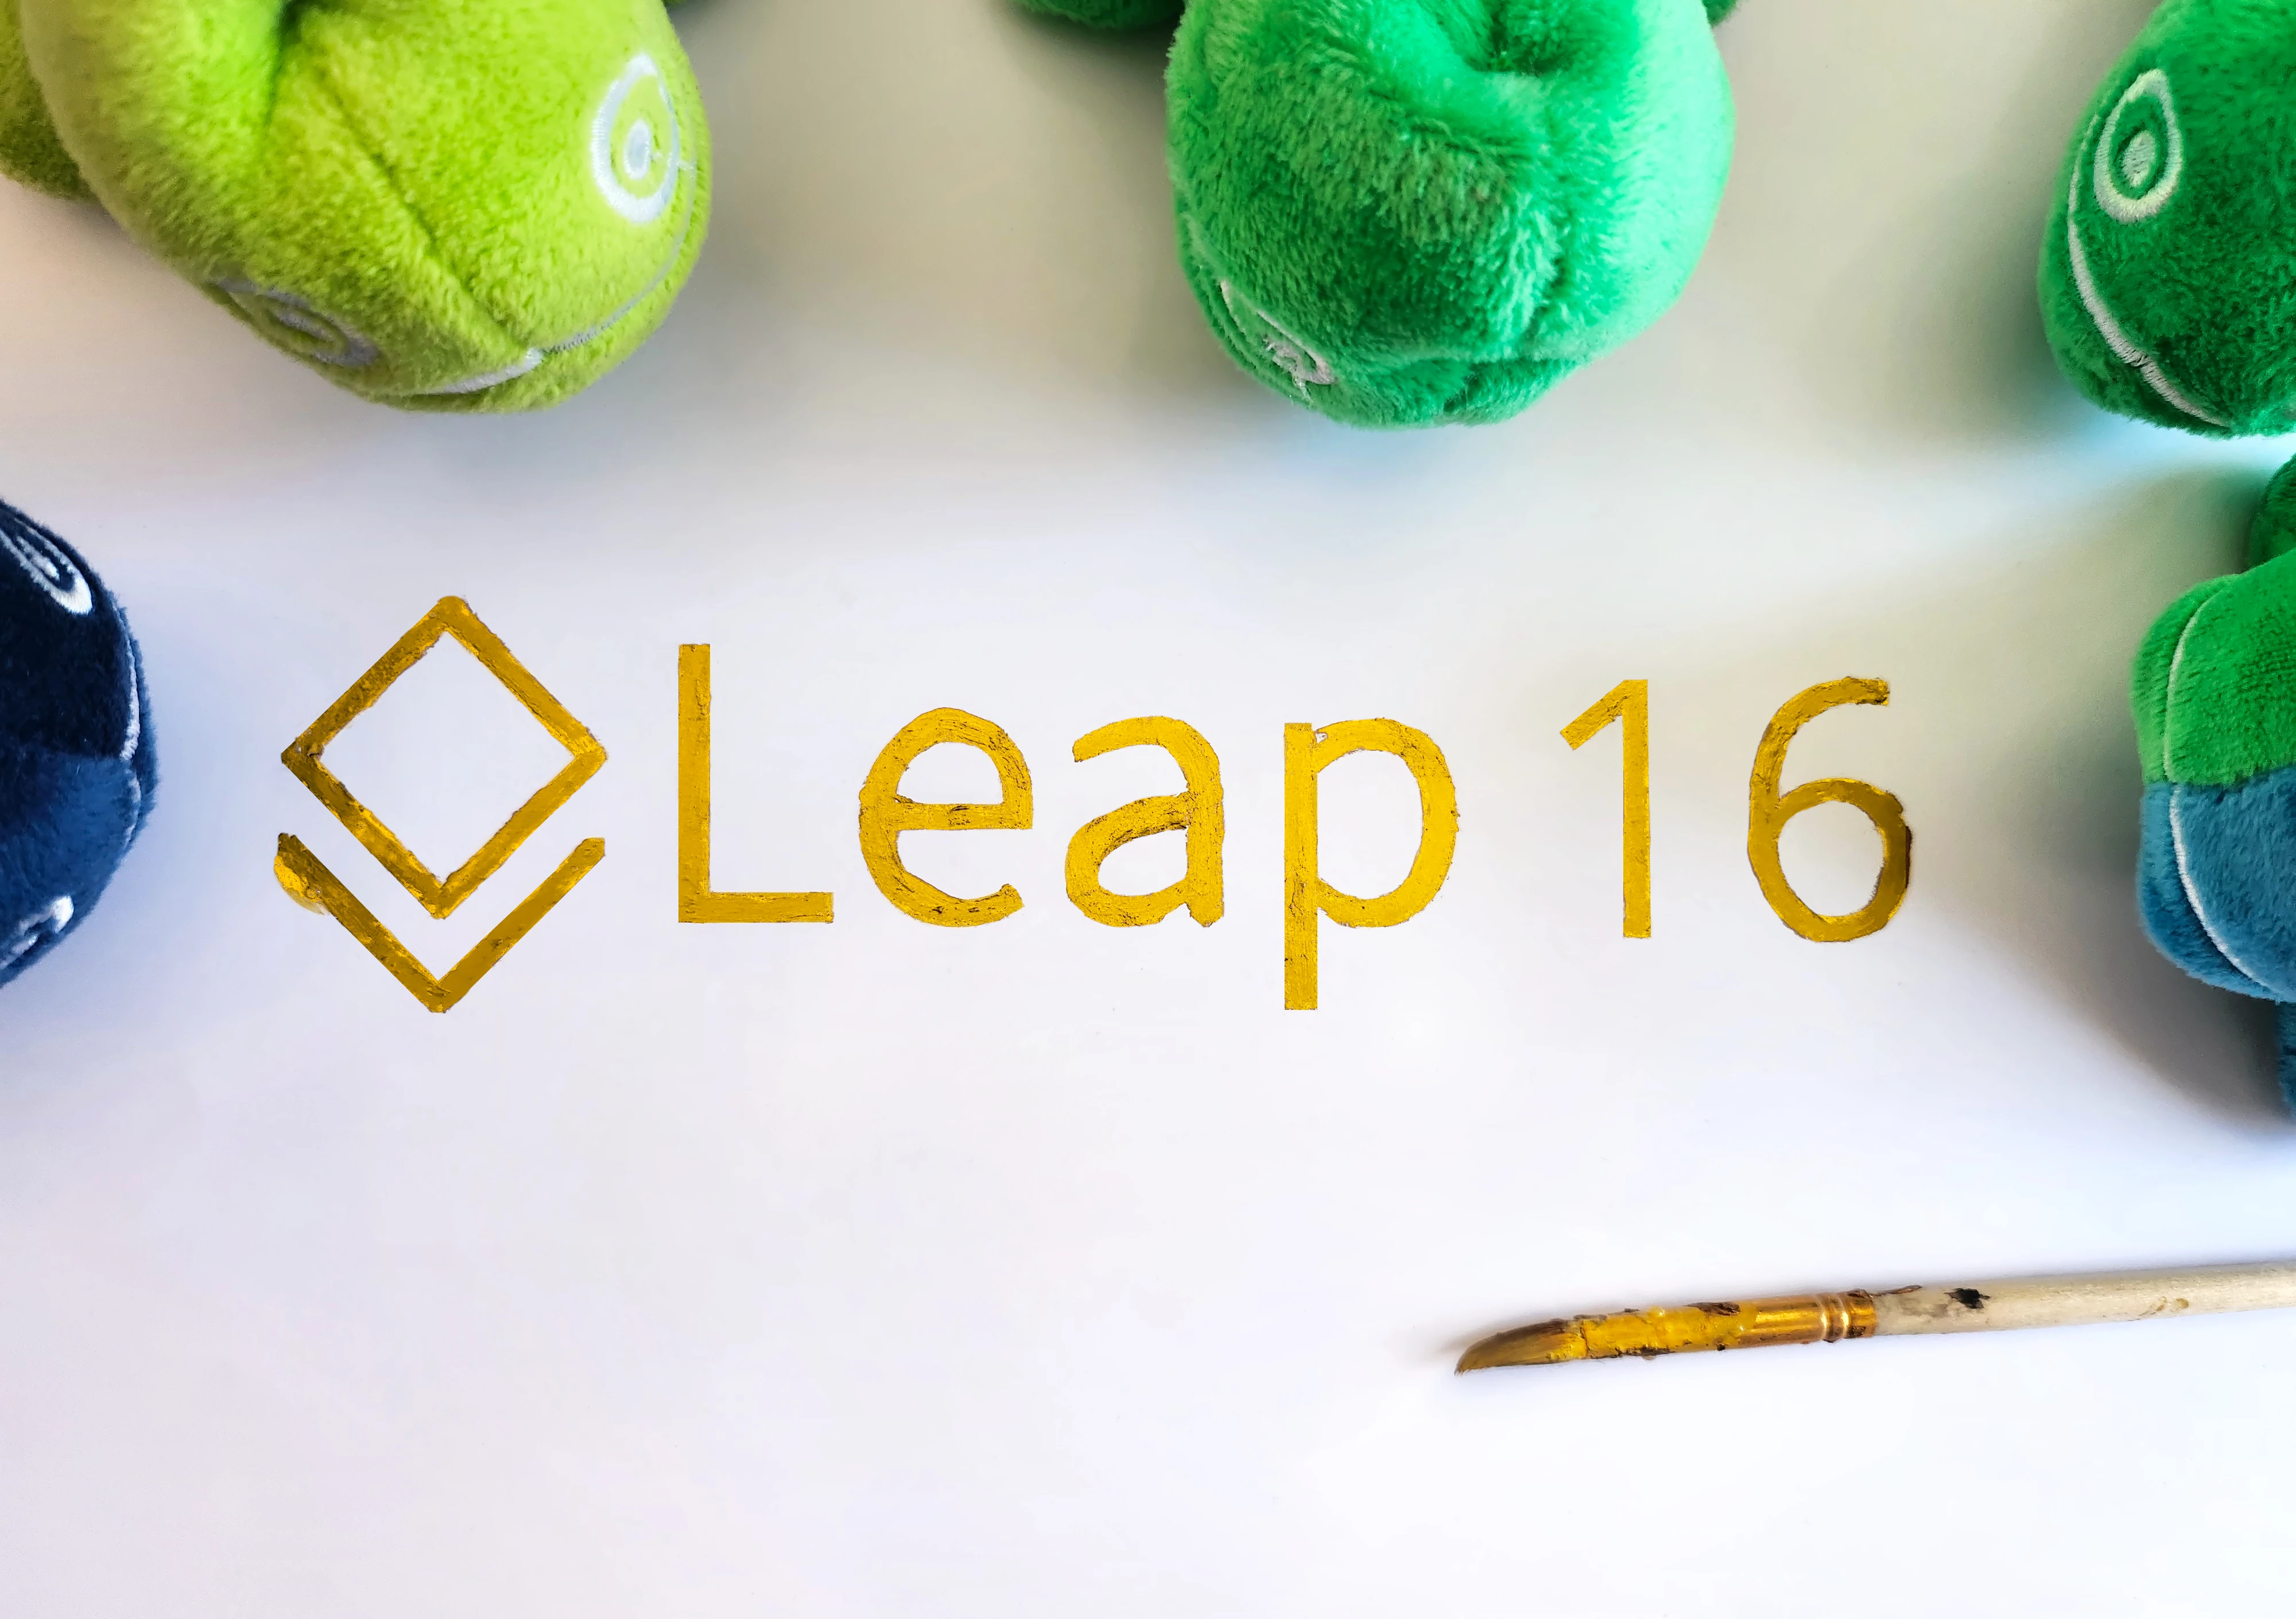 openSUSE Leap 16 Confirmed, Will Be Based on SUSE’s New Adaptable Linux Platform